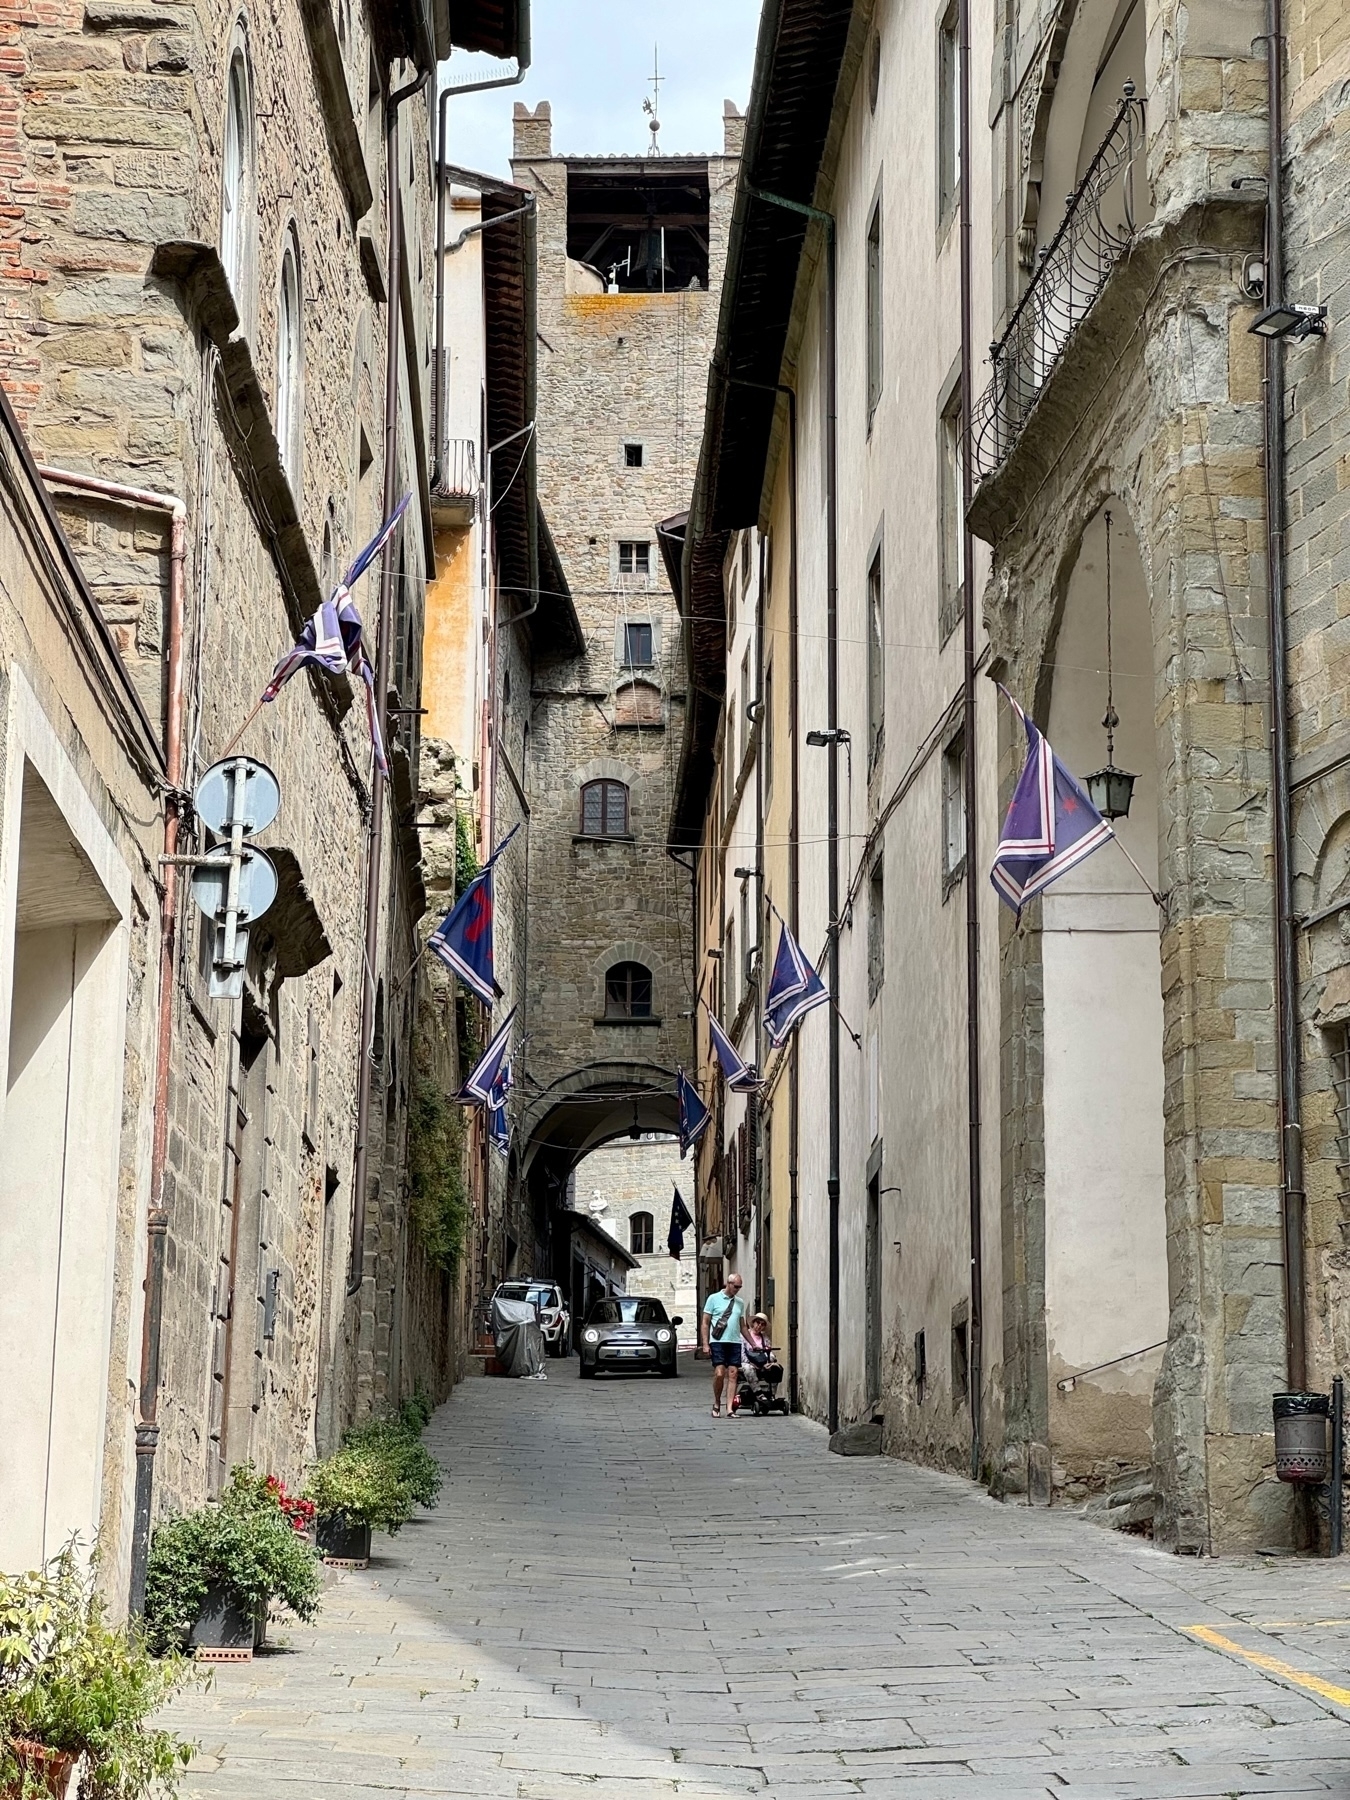 Narrow street in a historic European town, lined with stone buildings and colorful banners. A steep incline leads to an archway and a tower in the background. A few pedestrians and a parked car are visible.